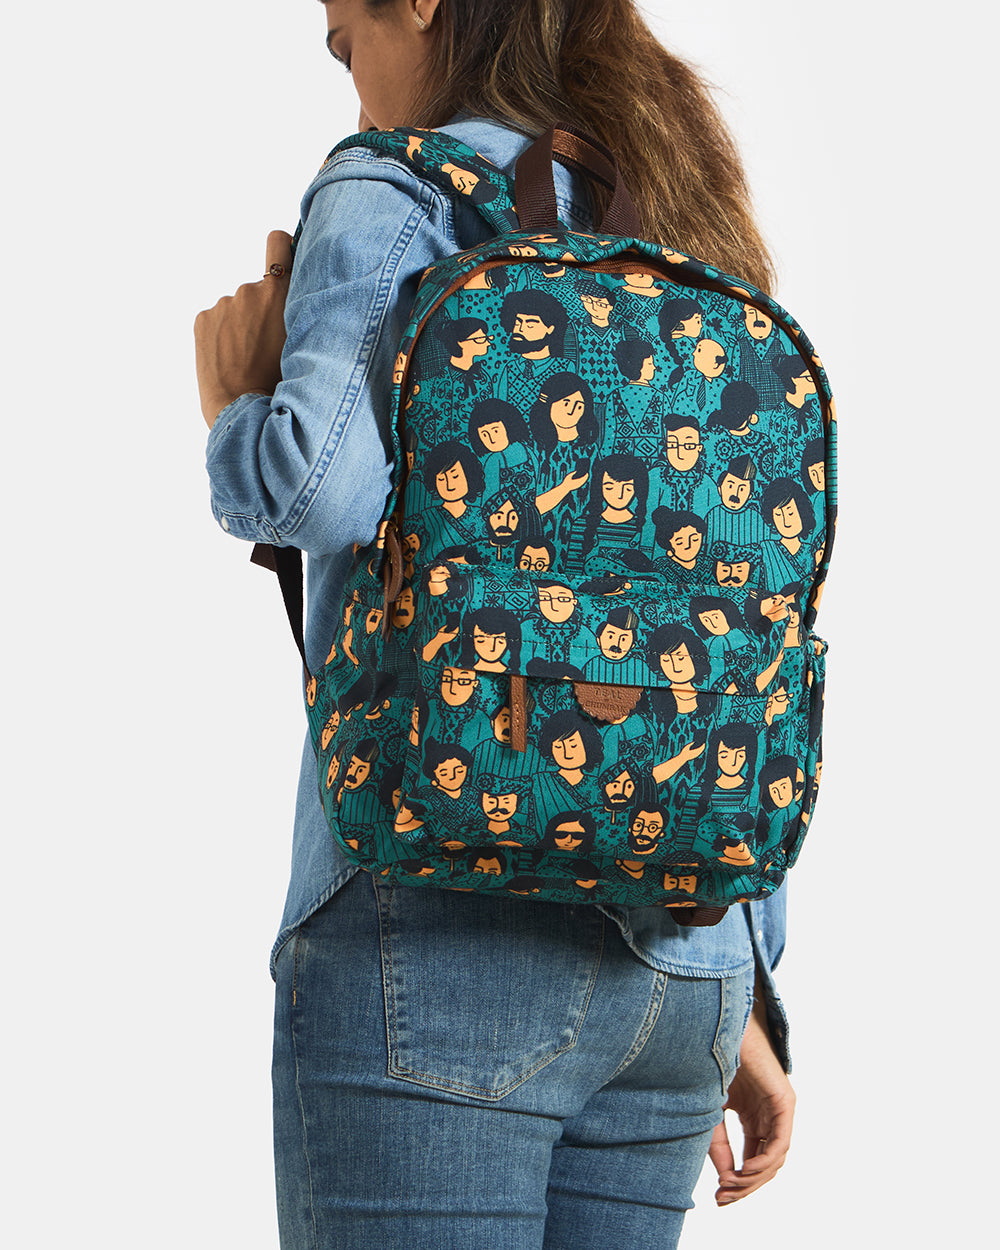 Teal by Chumbak | Faces Backpack